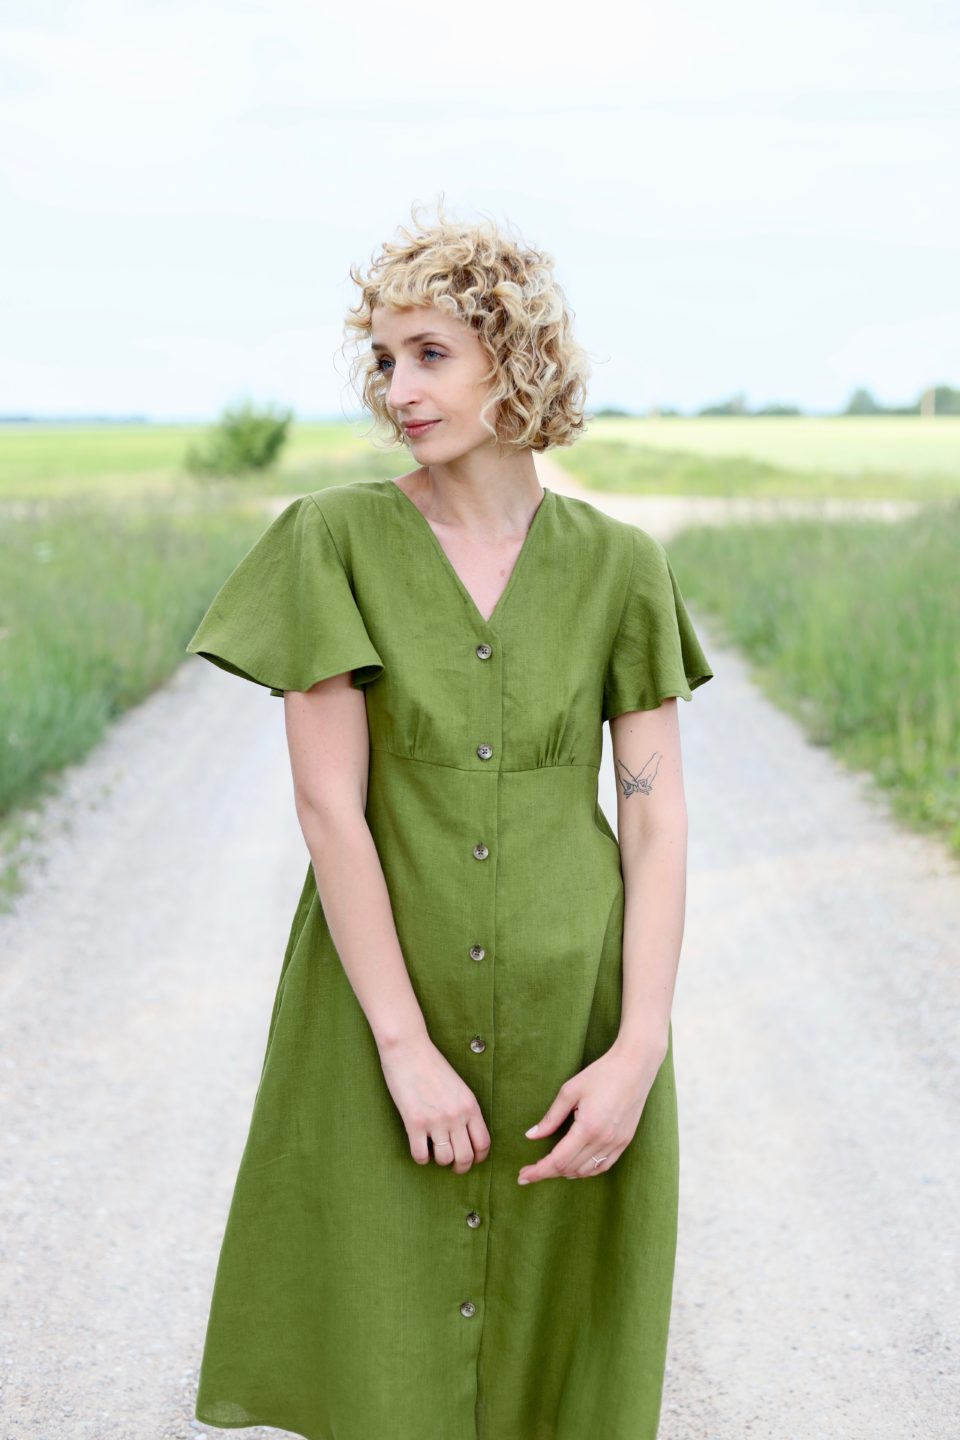 Linen dress with frill sleeves in moss green color | Dress | Sustainable clothing | OffOn clothing